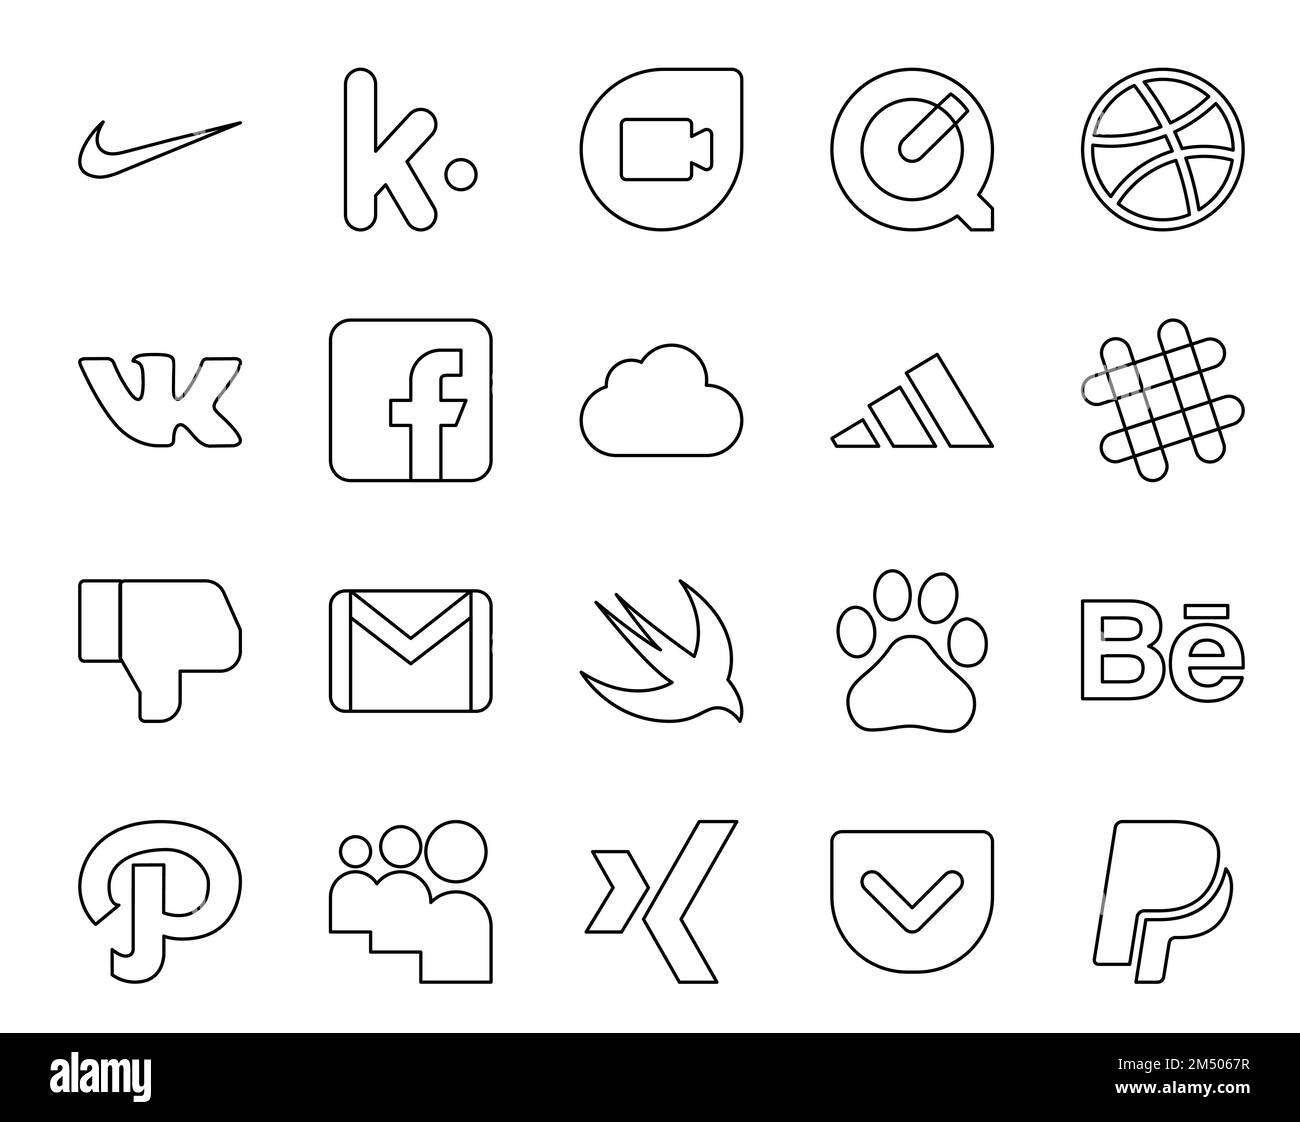 20 Social Media Icon Pack Including behance. swift. adidas. mail. gmail Stock Vector